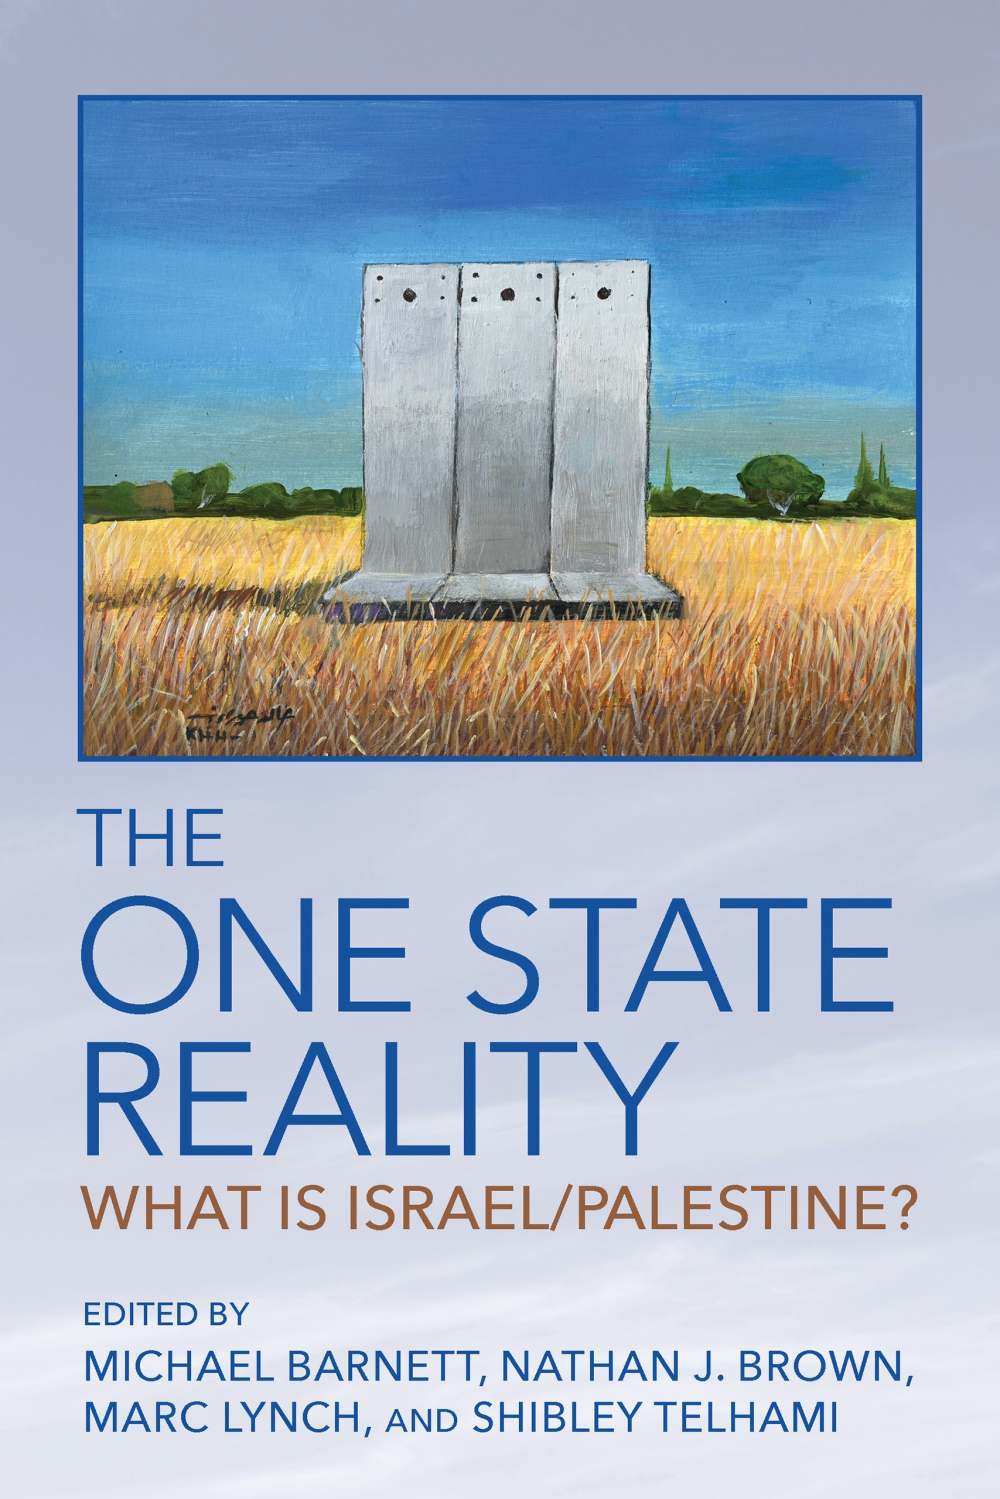 The One State Reality book cover image